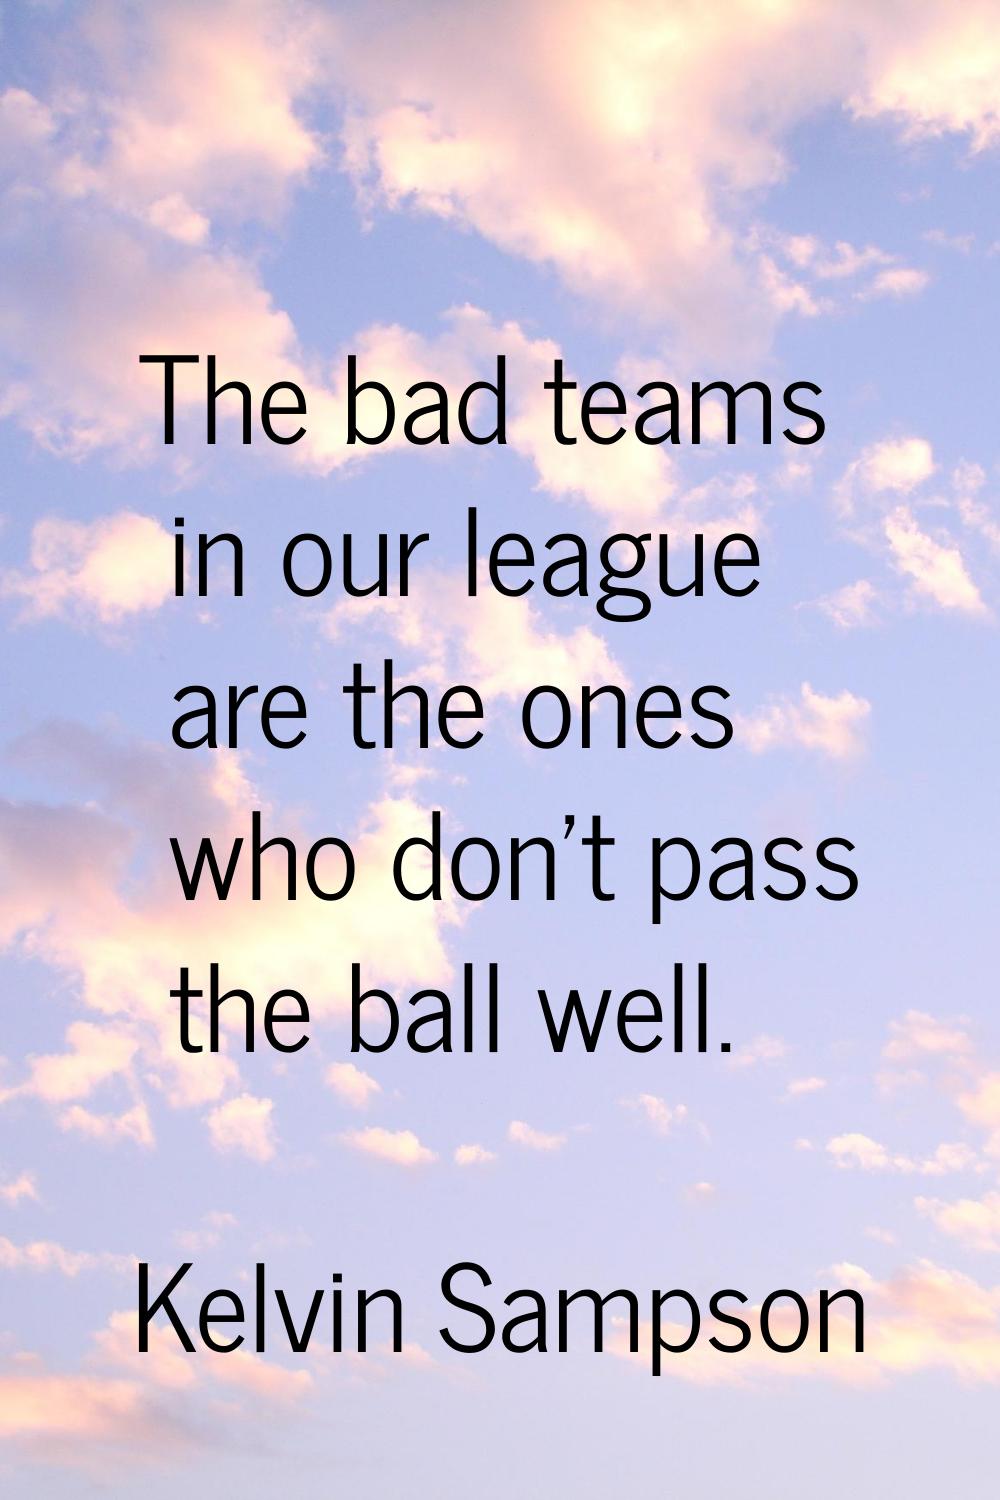 The bad teams in our league are the ones who don't pass the ball well.